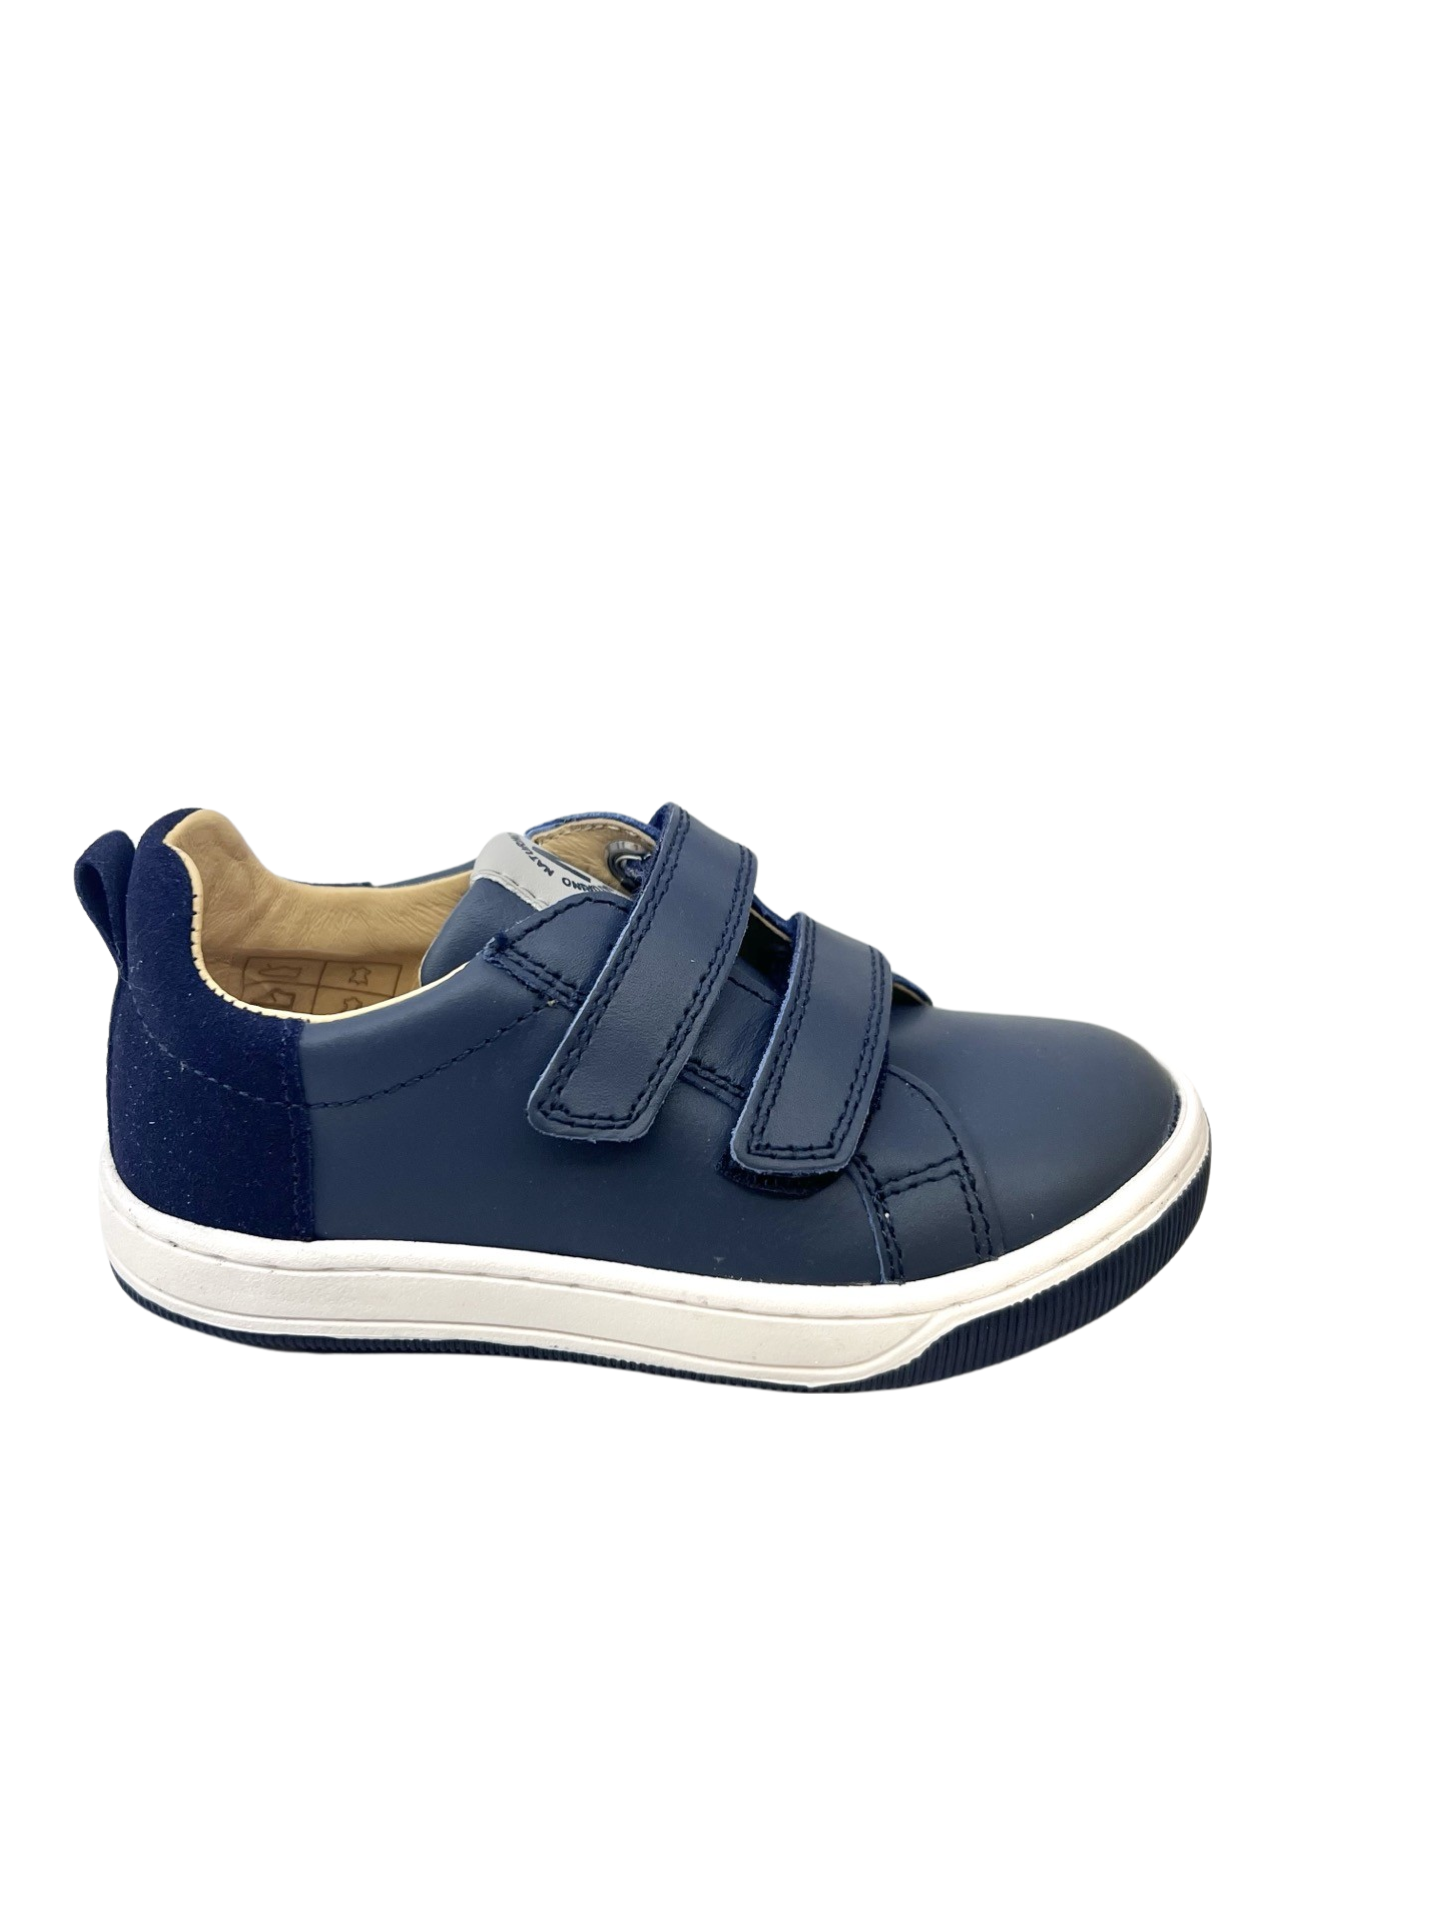 Naturino Navy Double Velcro Sneaker With Suede Back - Caleb